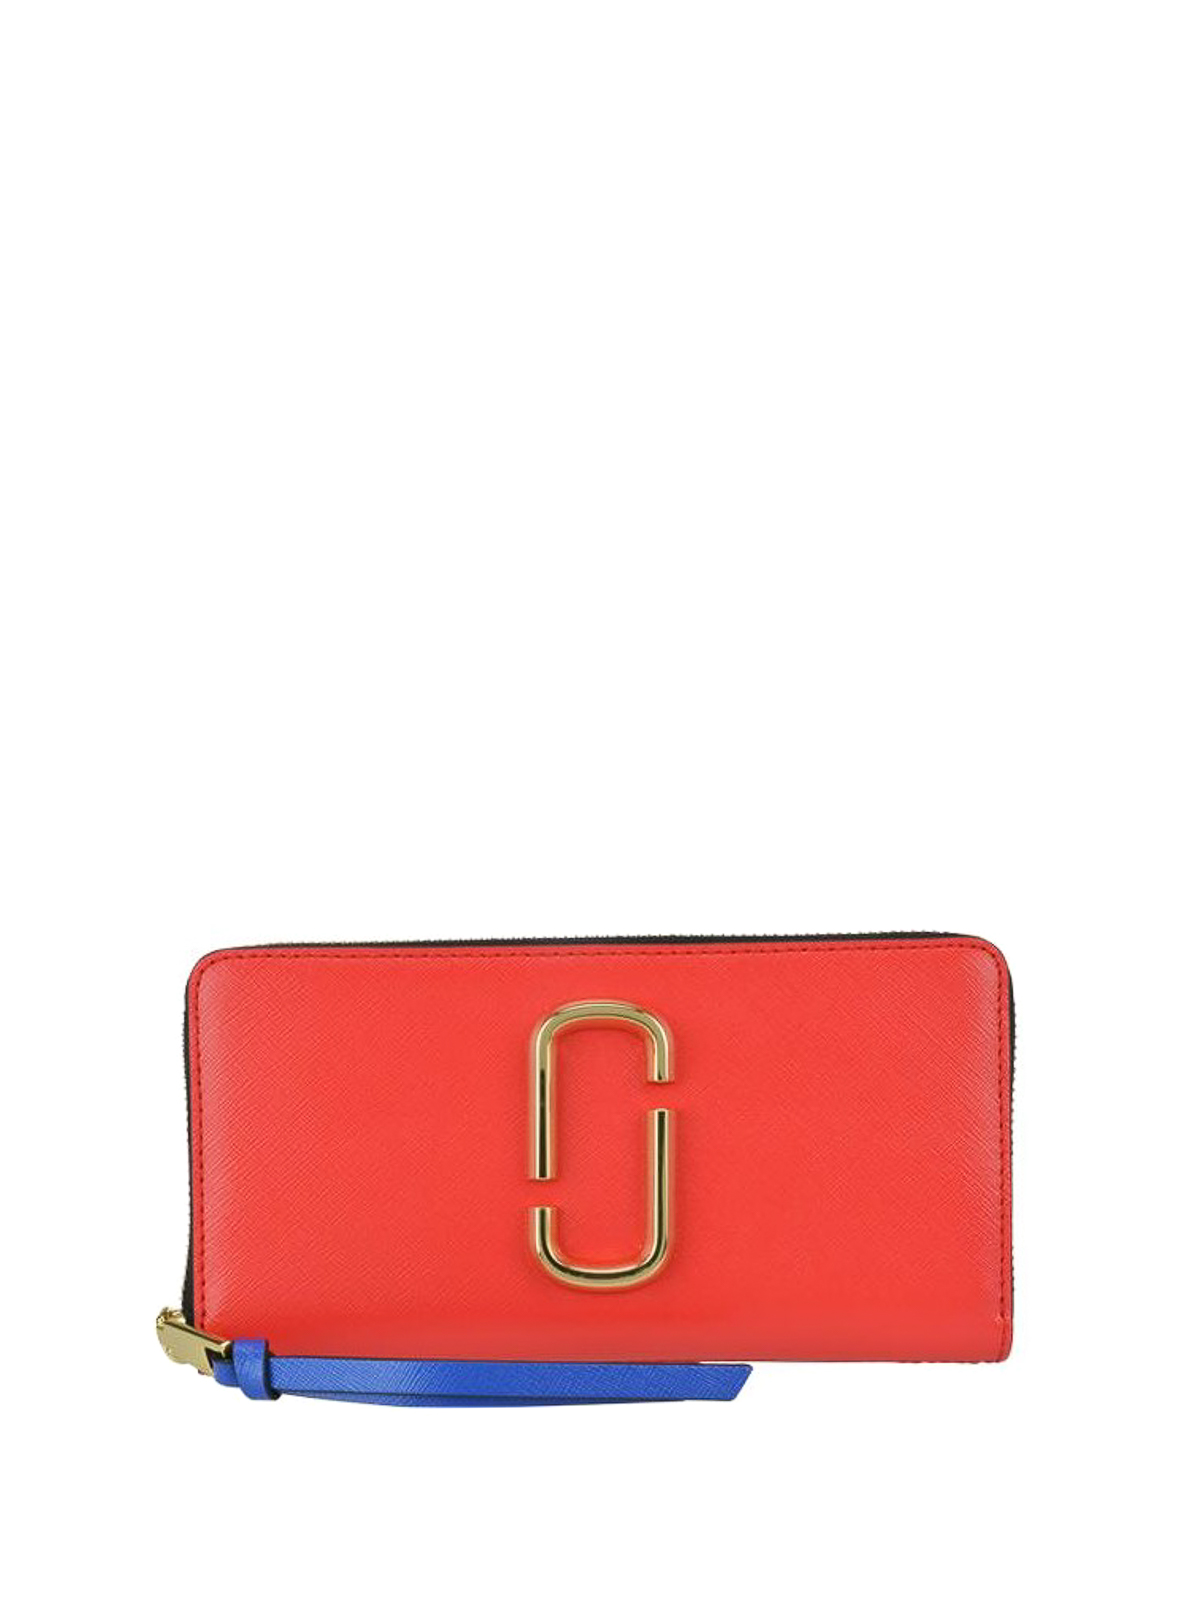 Marc Jacobs Snapshot Bag In Poppy Red Leather With Polyurethane Coating in  Pink